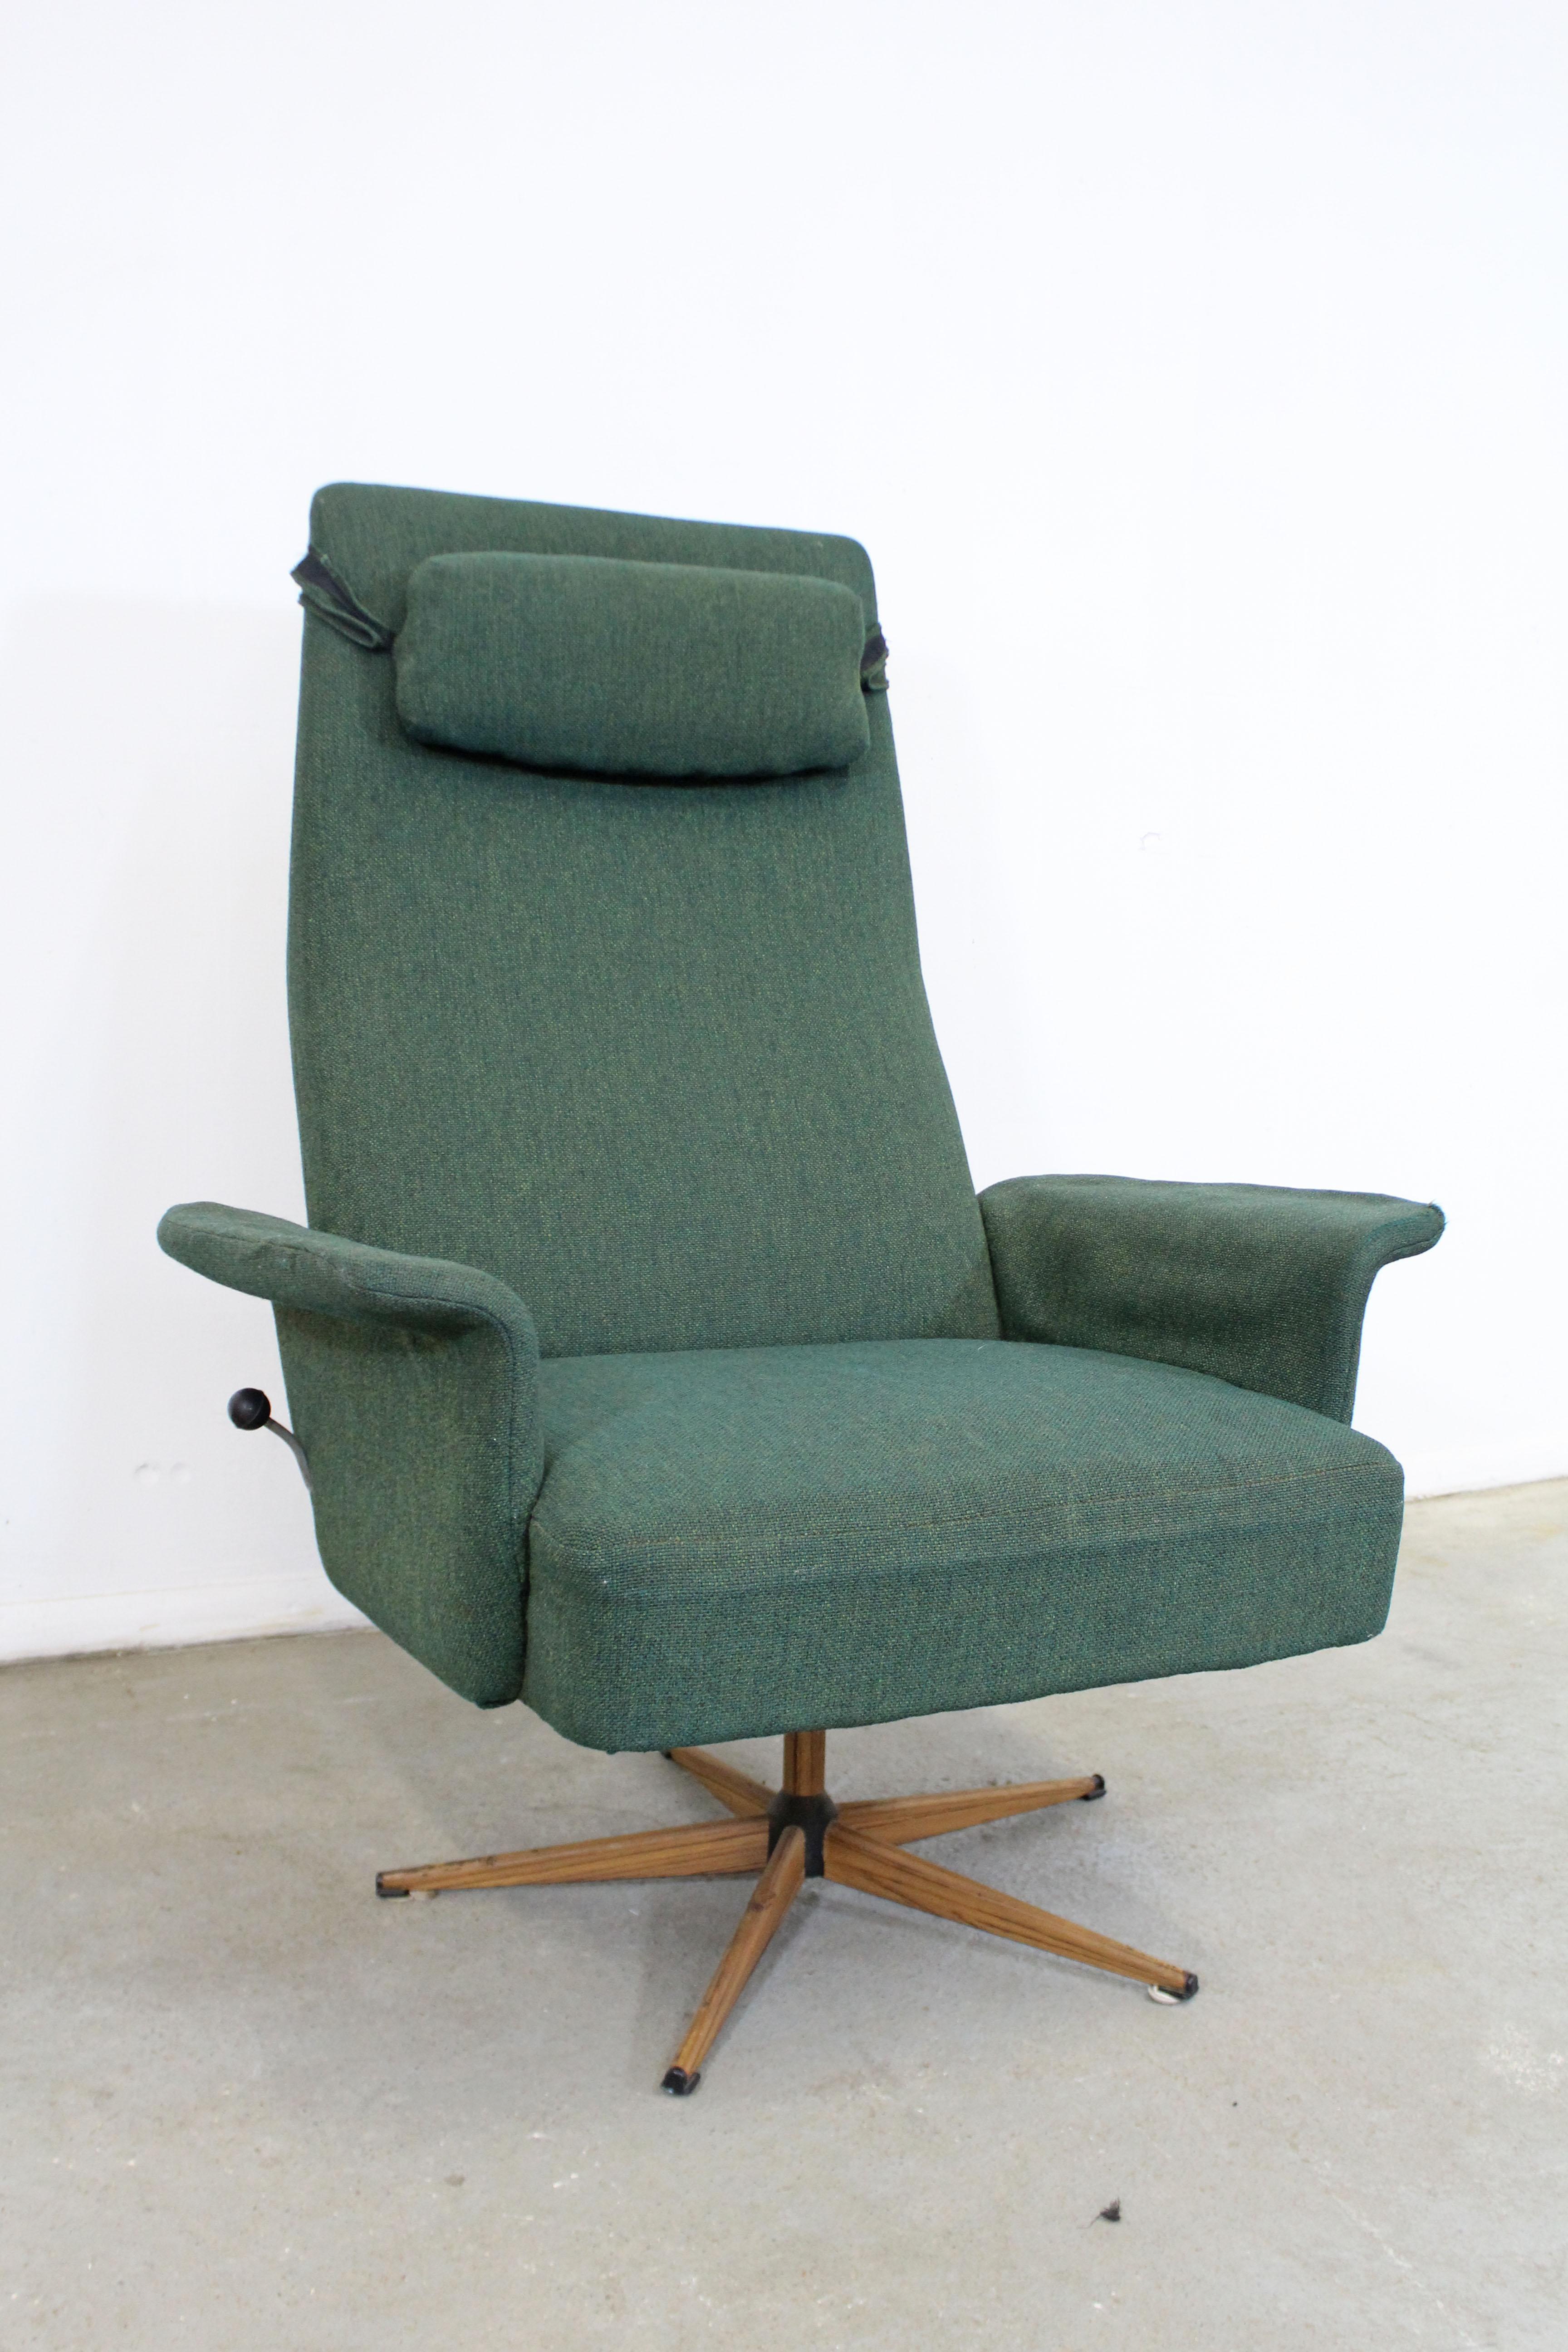 What a find. Offered is a Danish modern style lounge chair with green upholstery that swivels and rocks. Has a removable headrest and side lever to lock the chair in place. It is structurally sound condition showing age wear on upholstery and legs